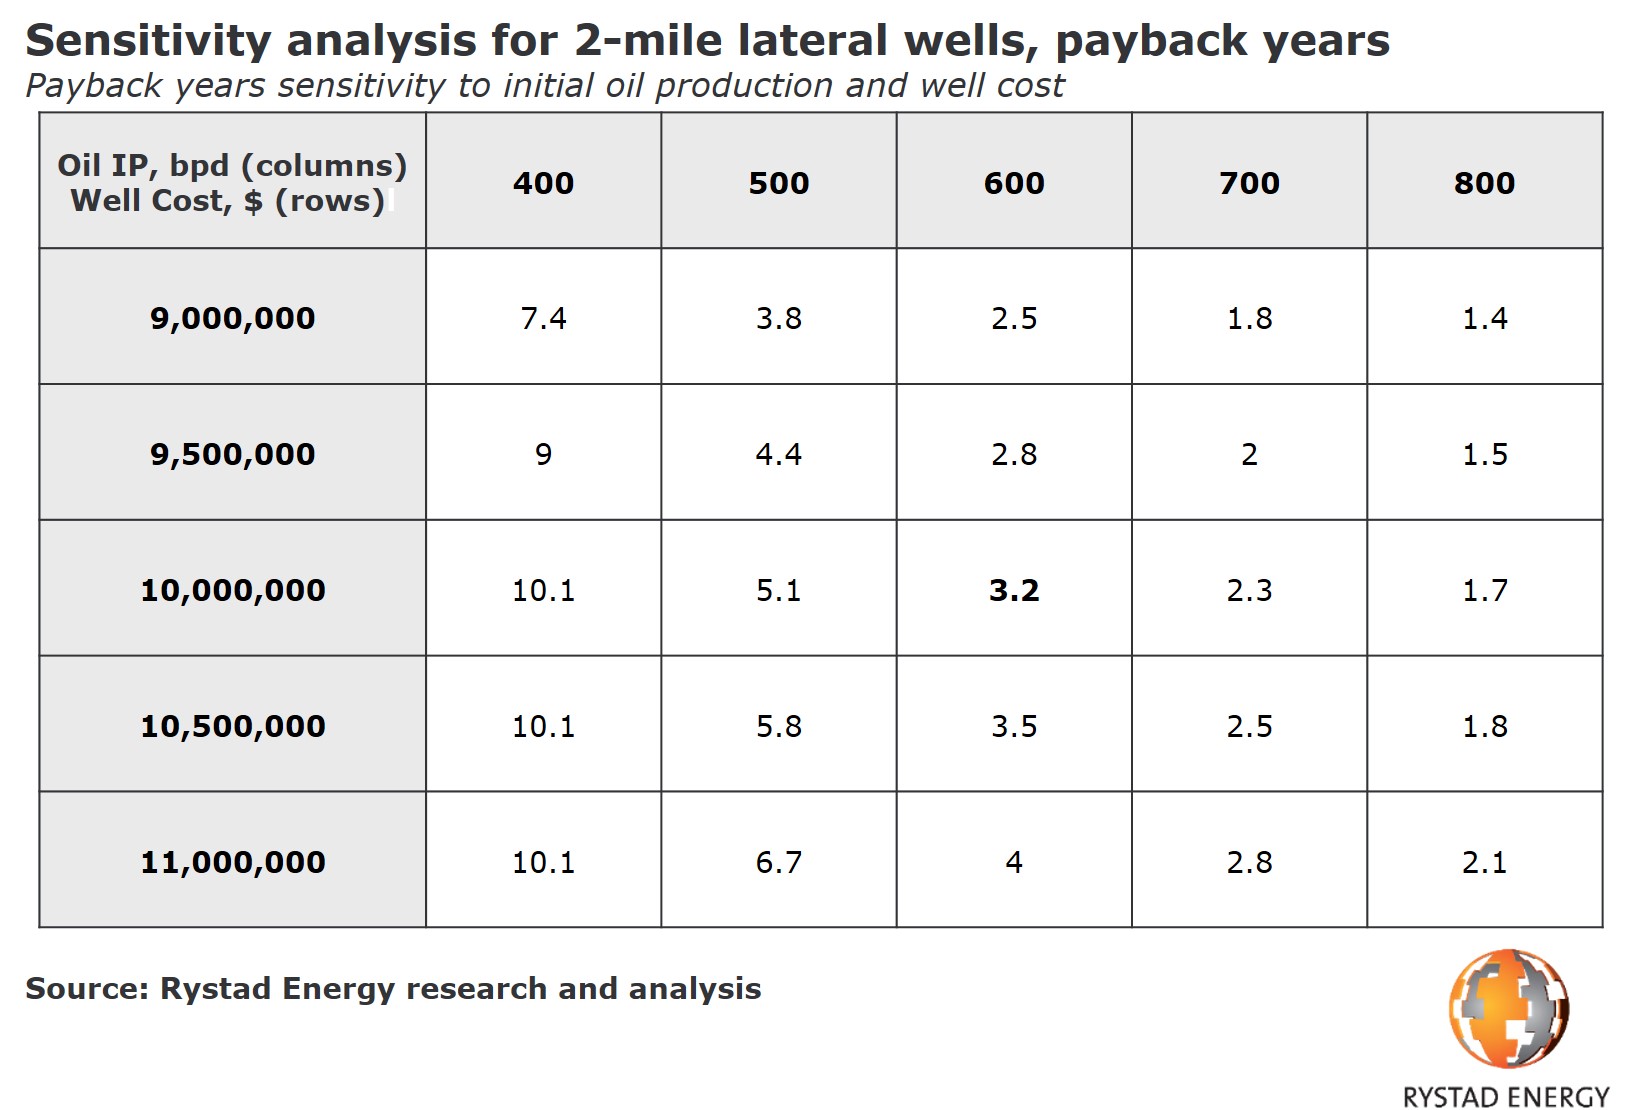 A table showing the sensitivity analysis for 2-mile lateral wells, payback years